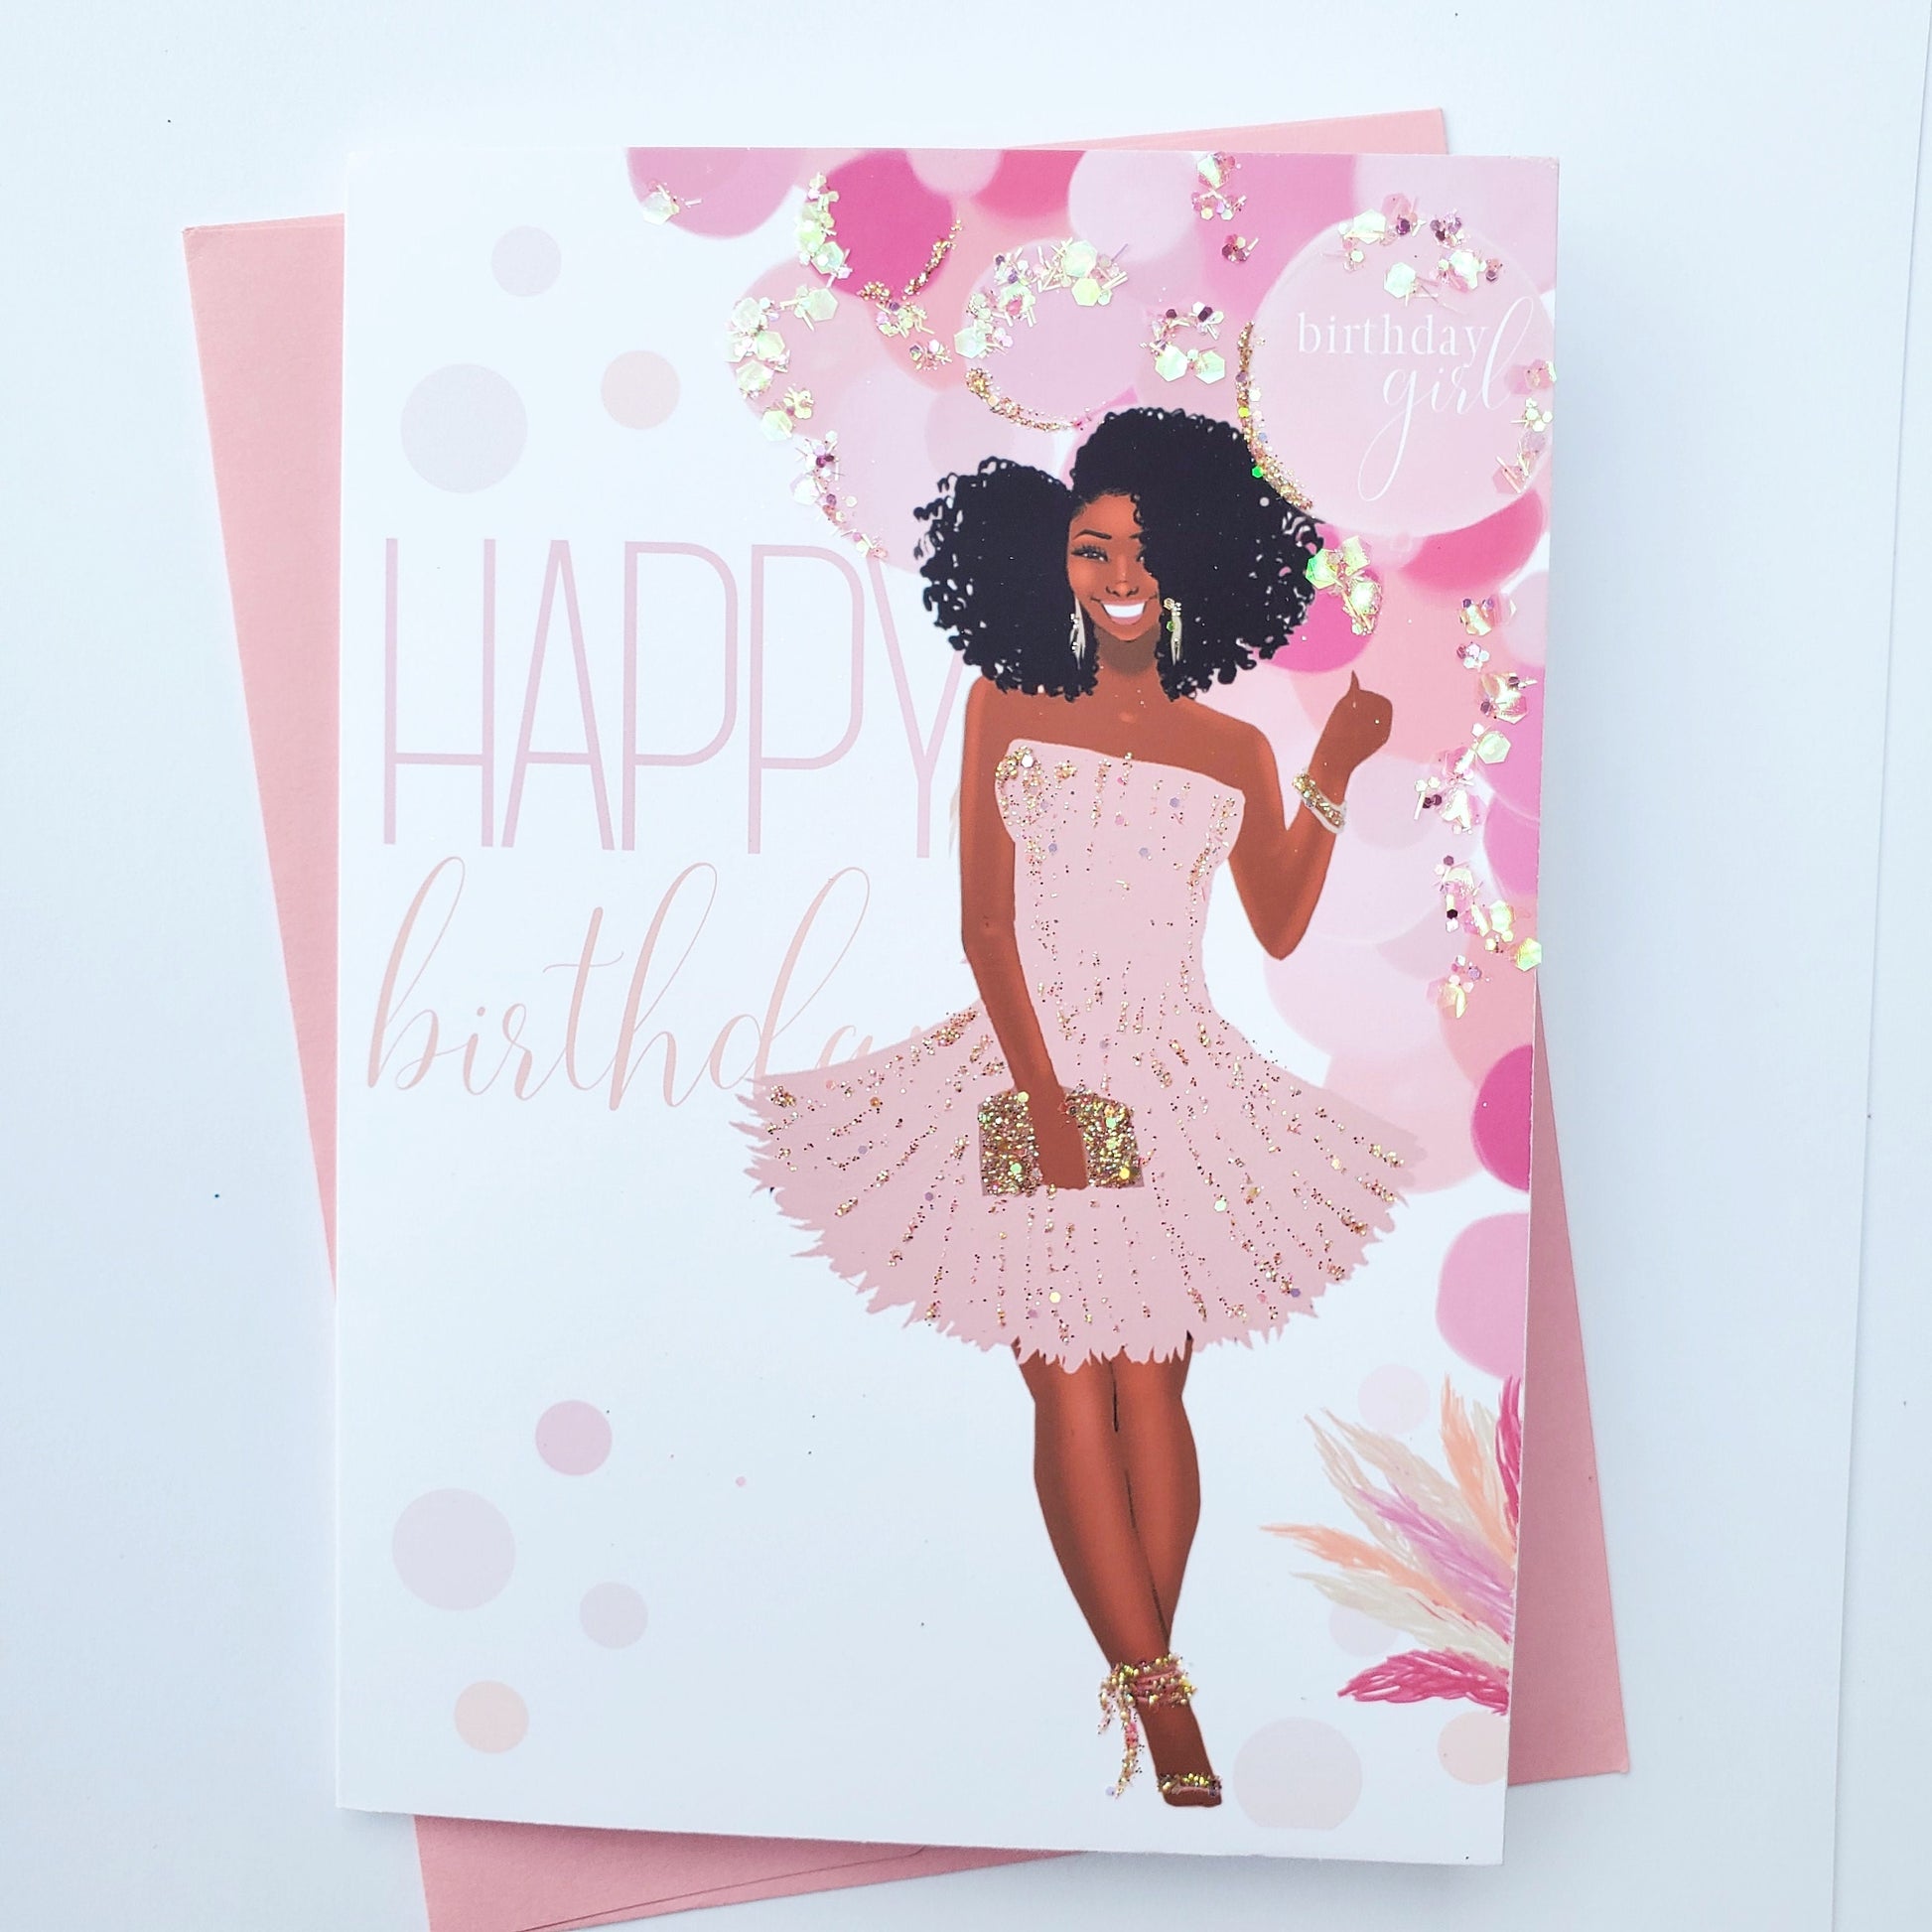 Pink Balloons - Black Woman Birthday Card | Black Greeting Cards | Black Woman Art | African American Cards | Embellished | Handmade Cards